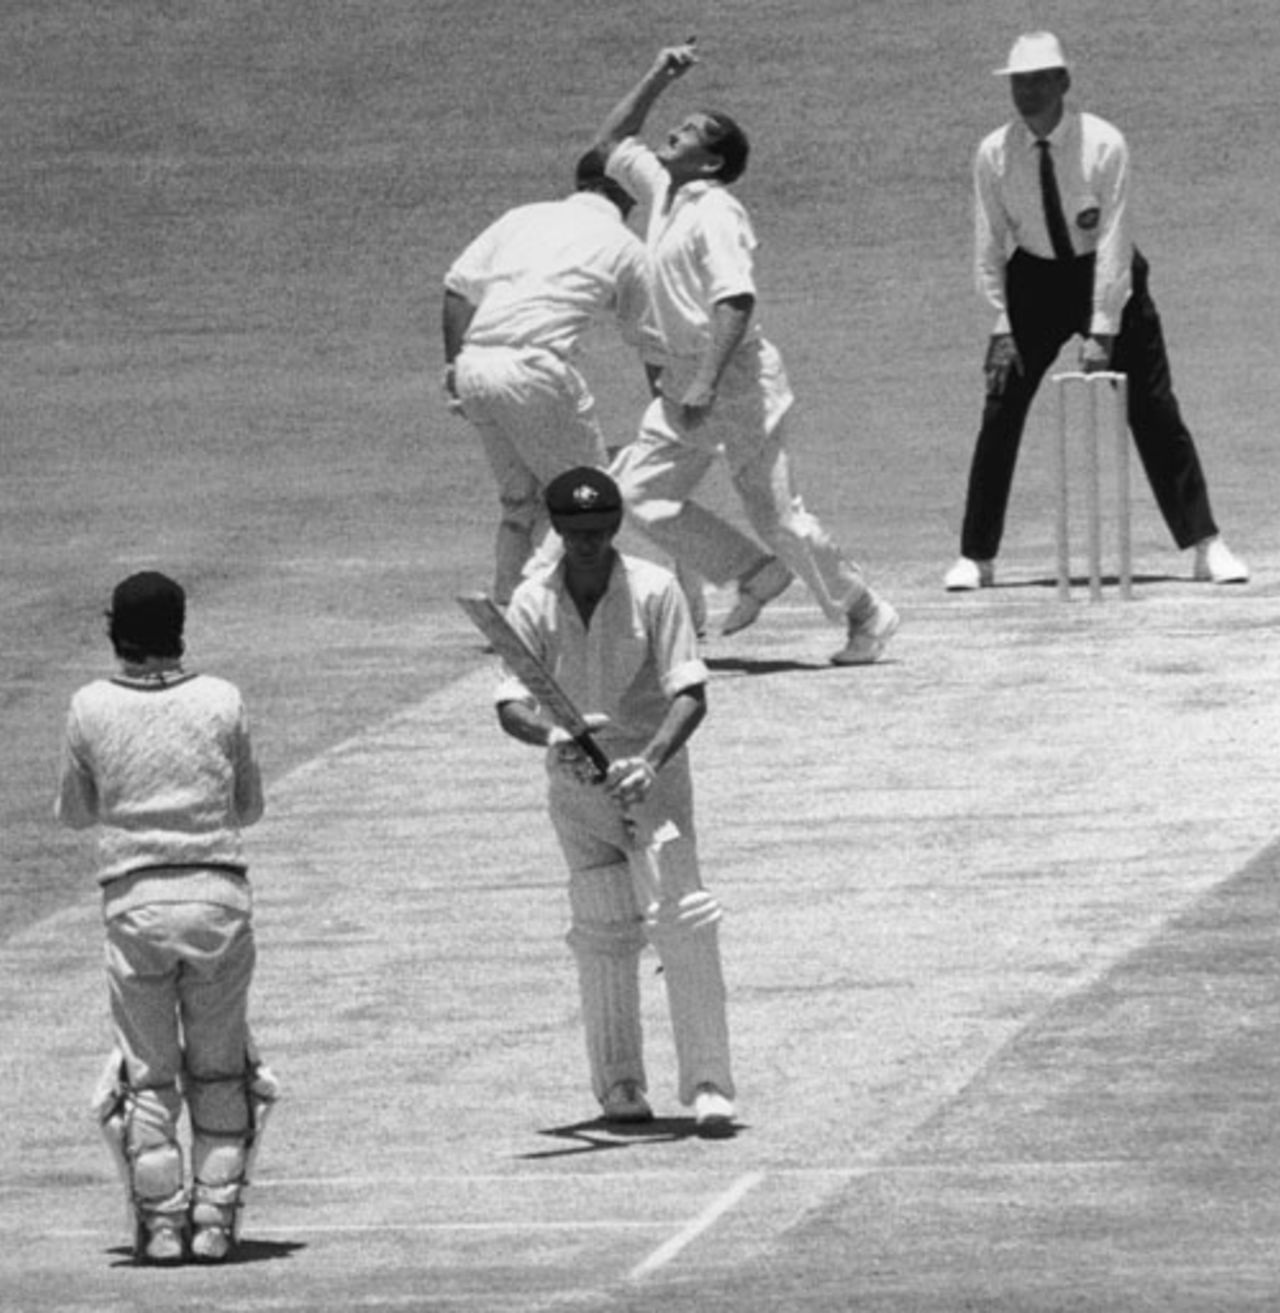 Ian Redpath is caught and bowled by Ray Illingworth for 171, Australia v England, 2nd Test, Perth, 4th day, December 15, 1970